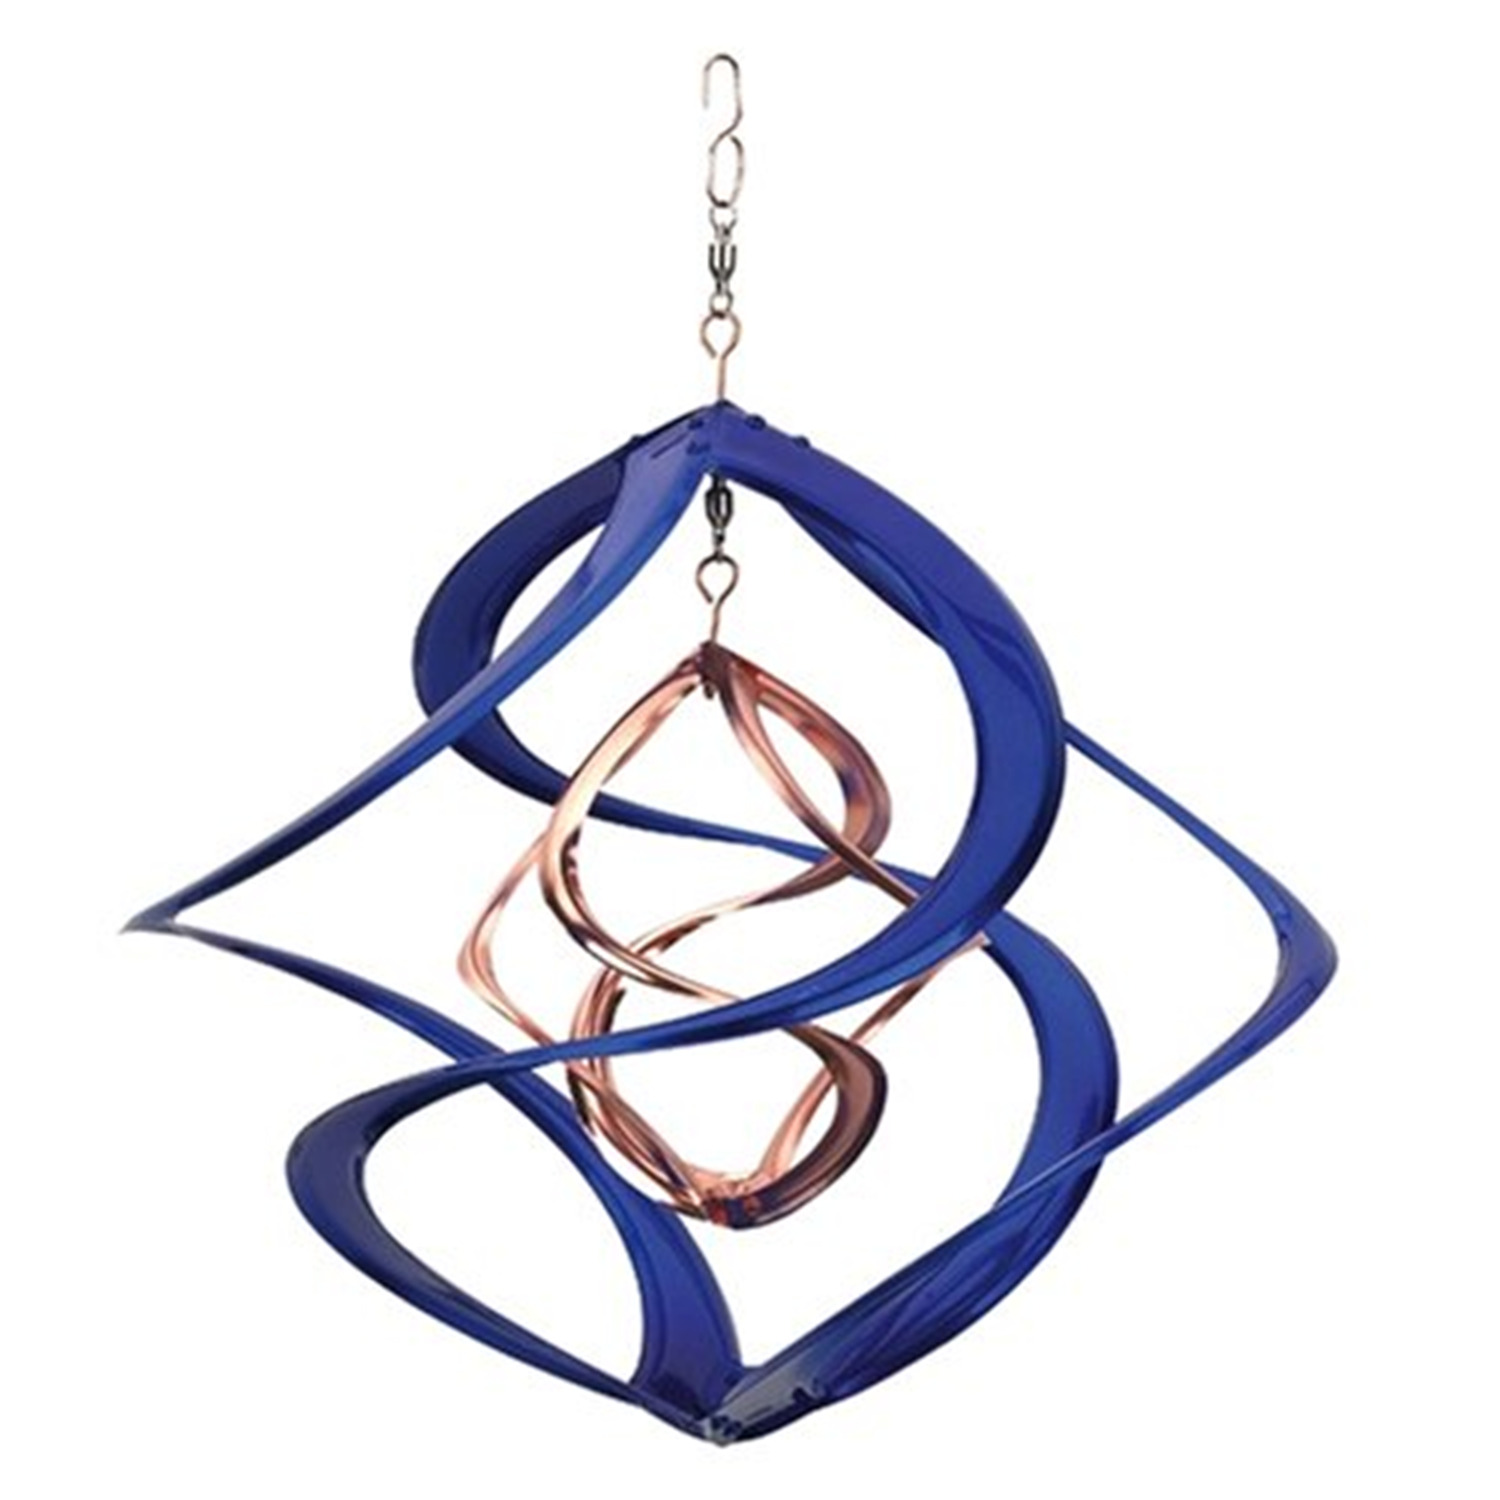 Red Carpet Studios Cosmix Copper and Blue Spinner, Medium 31093 - image 1 of 2